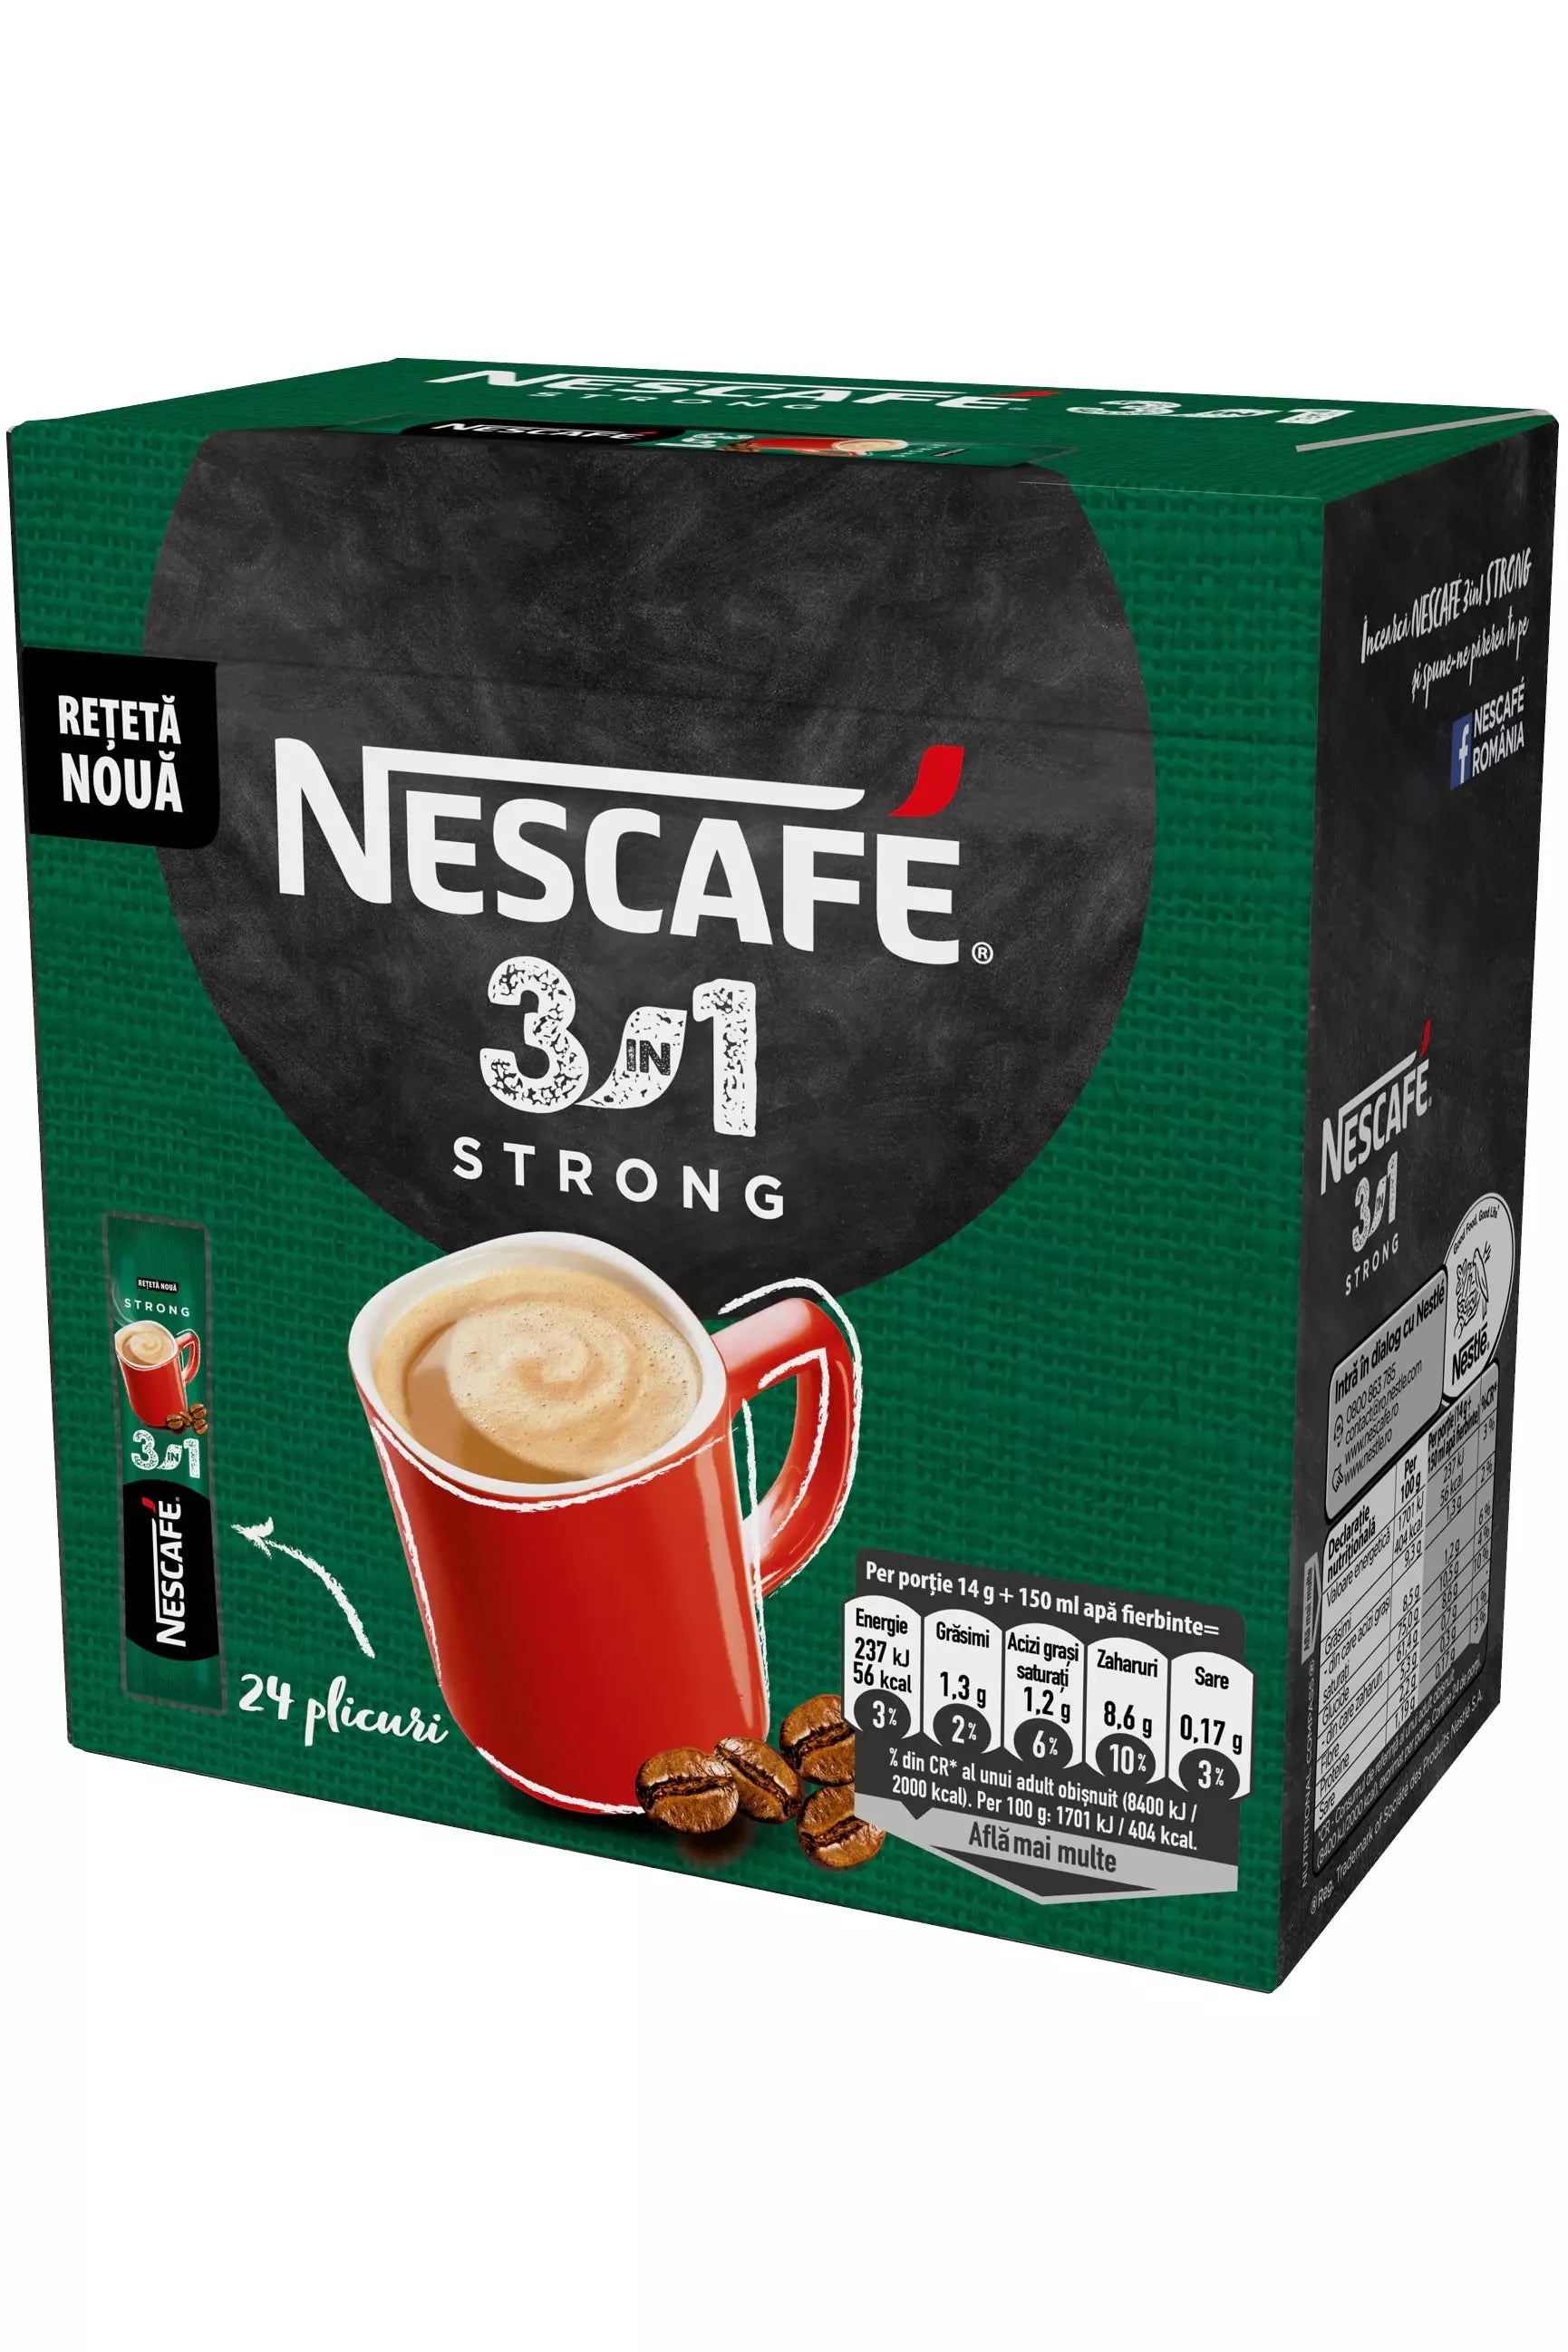 Nescafe Instant 3 in 1 Coffee - STRONG